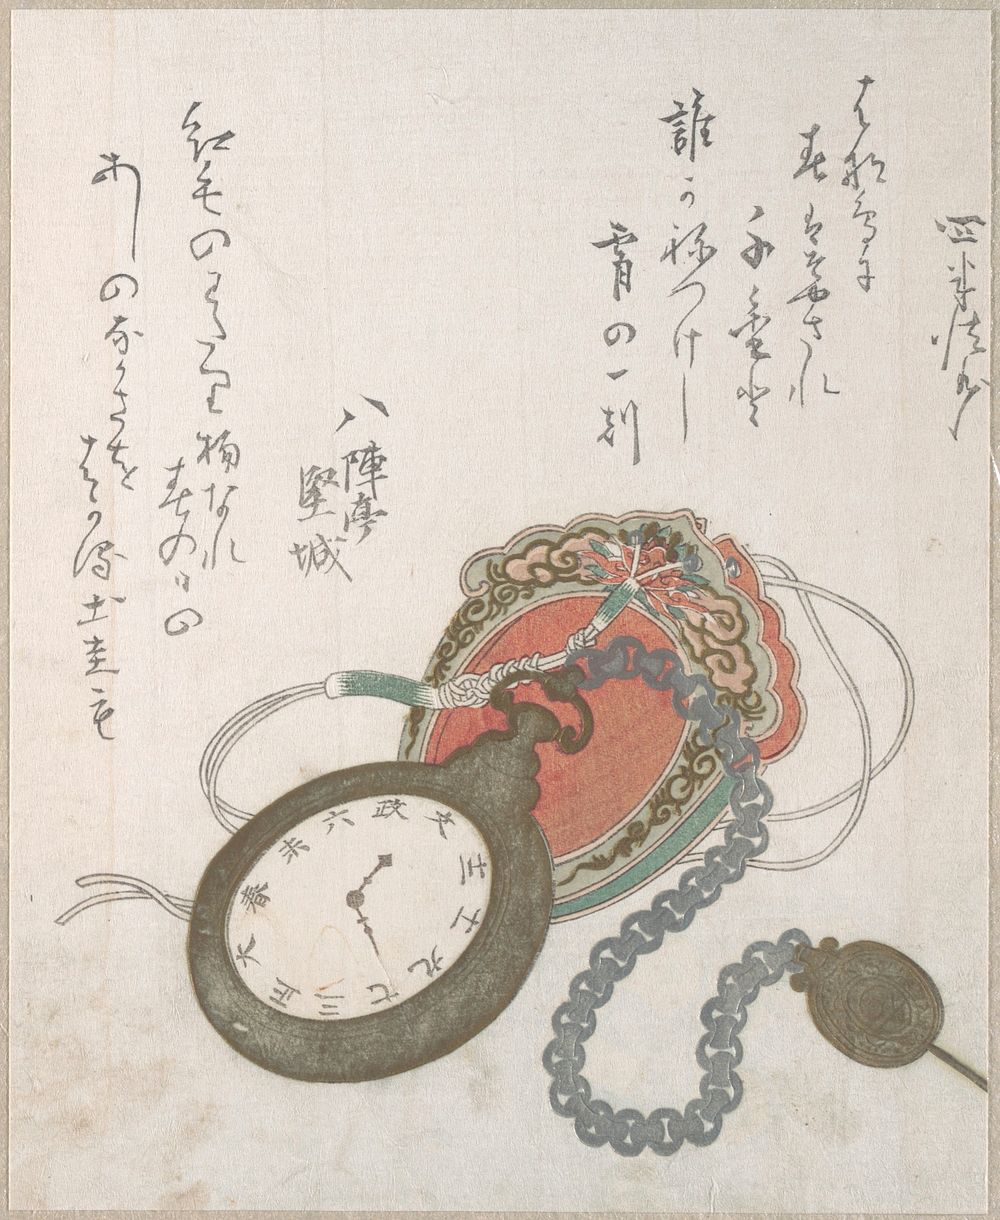 Western Pocket Watch From the Spring Rain Collection (Harusame shū), vol. 3. Original public domain image from the MET…